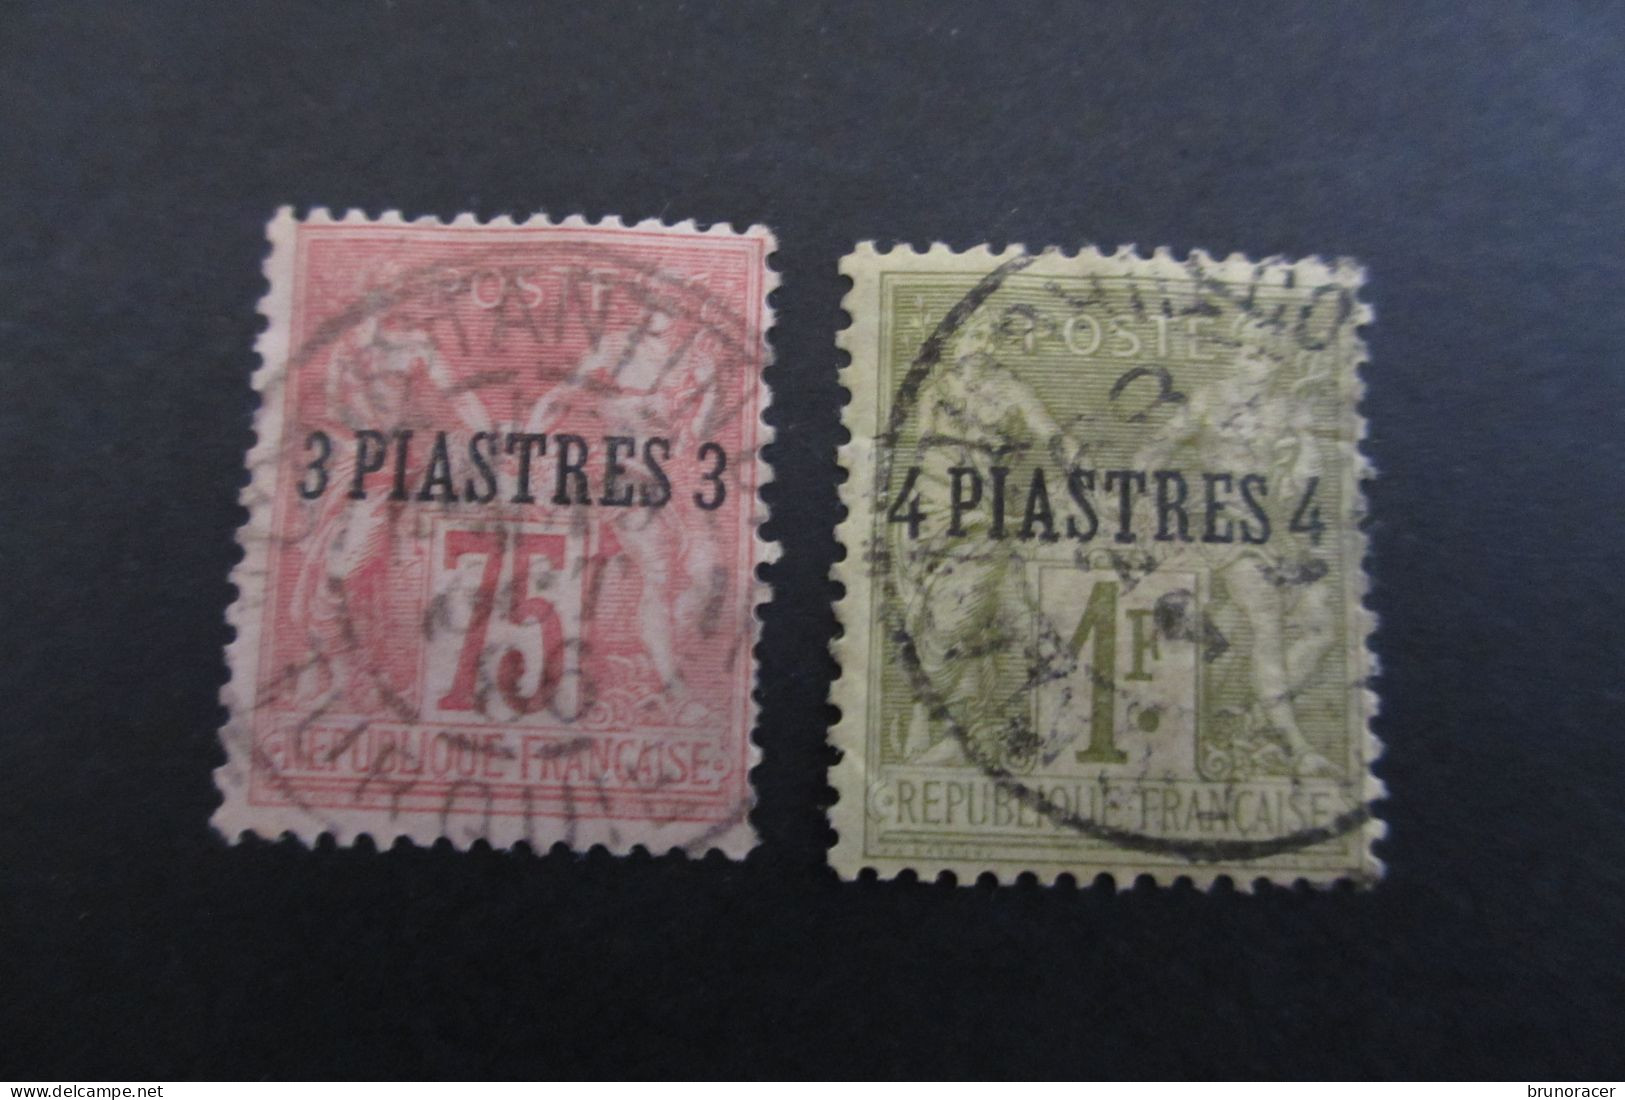 LEVANT BFE N°2/3 Oblit. TB  COTE 36 EUROS VOIR SCANS - Used Stamps